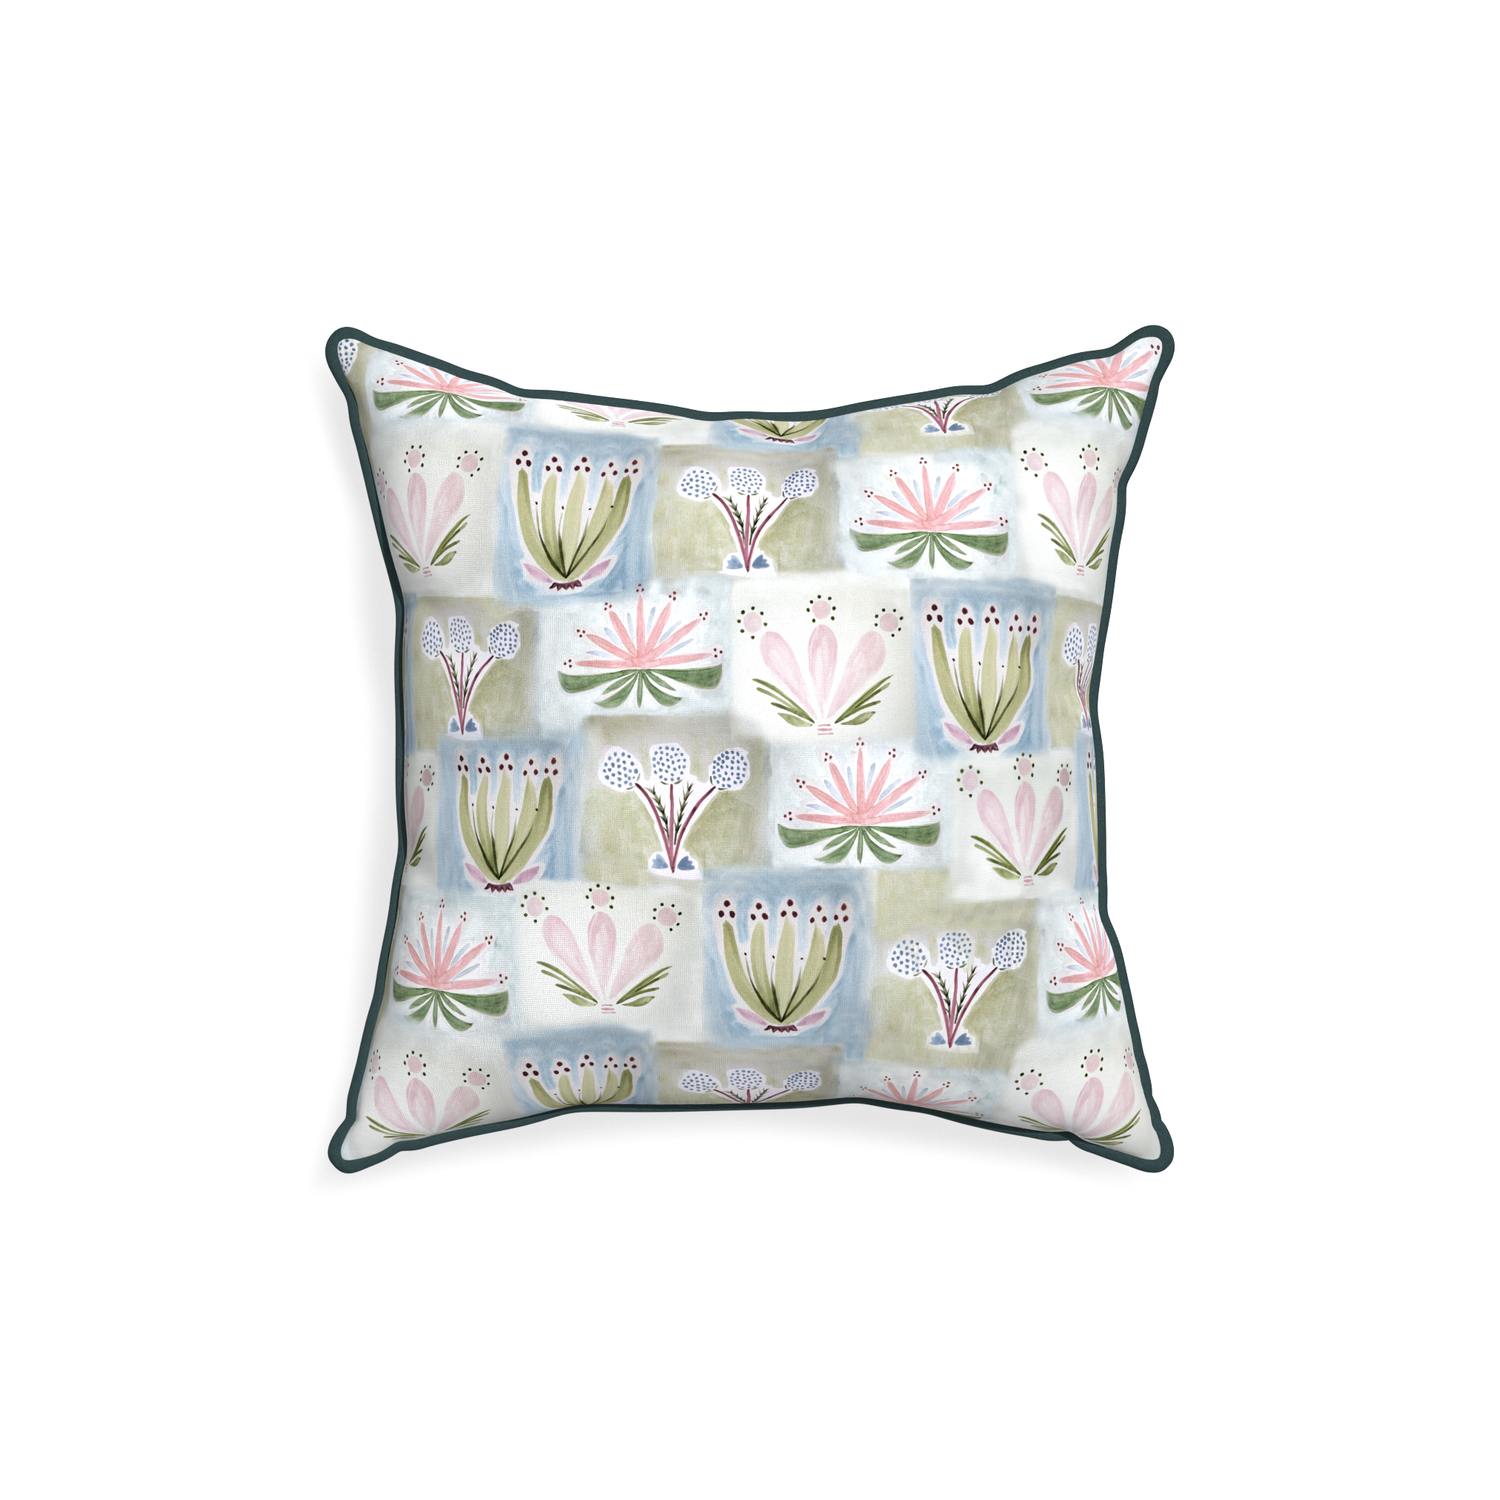 18-square harper custom hand-painted floralpillow with p piping on white background